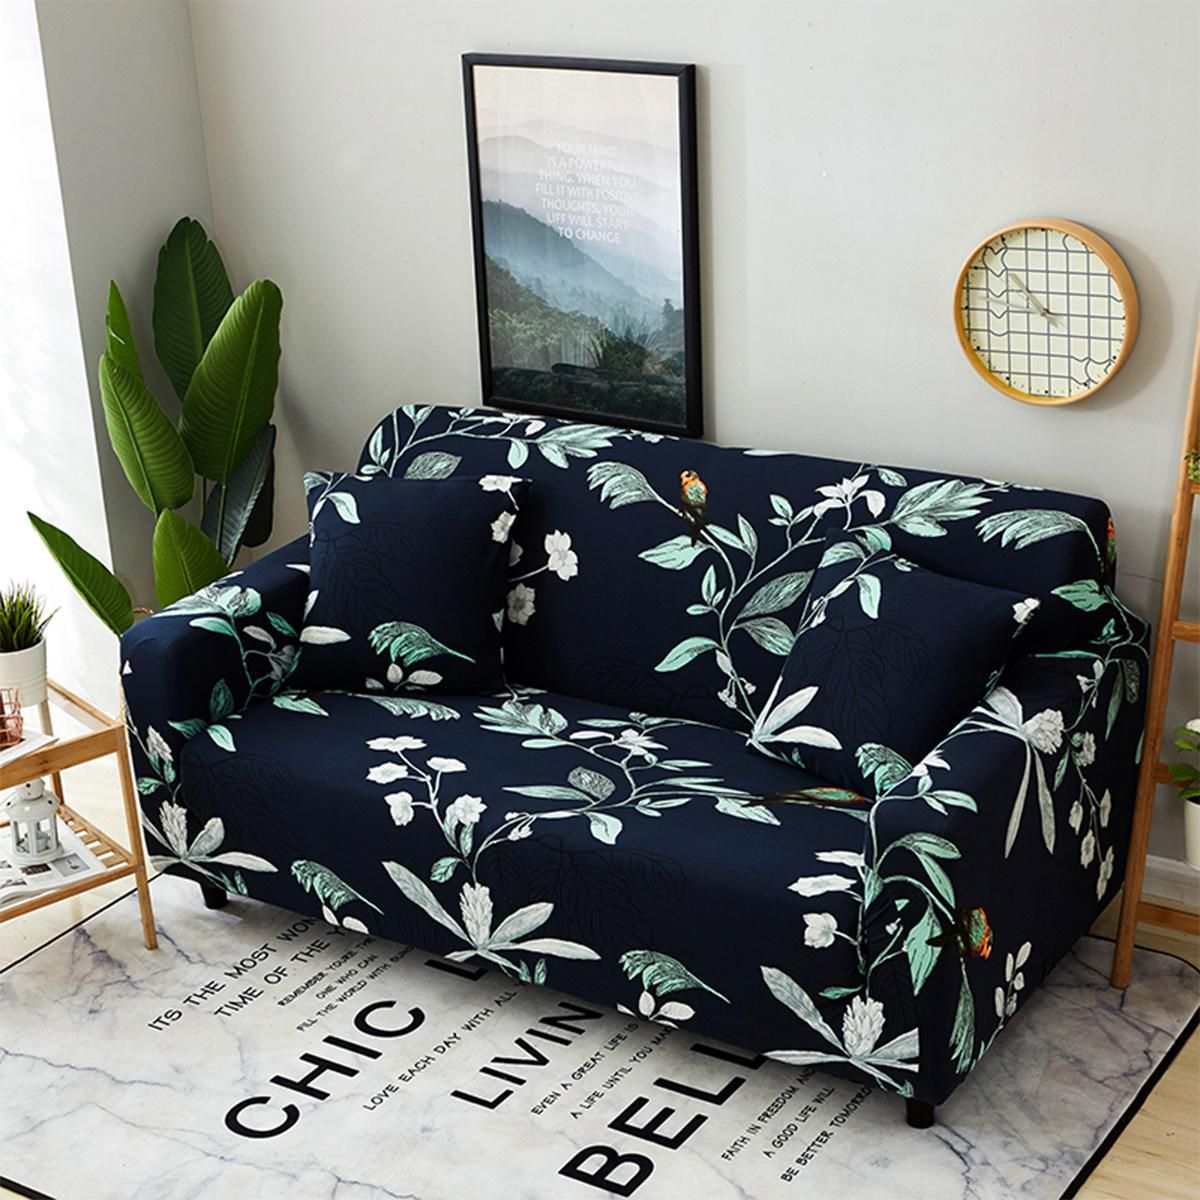 PICTURESQUE Sofa Slipcover Stretch Elastic Fabric Flower Bird Pattern Chair Loveseat Couch Sofa Covers Pet Protector With One Cushion Cover 